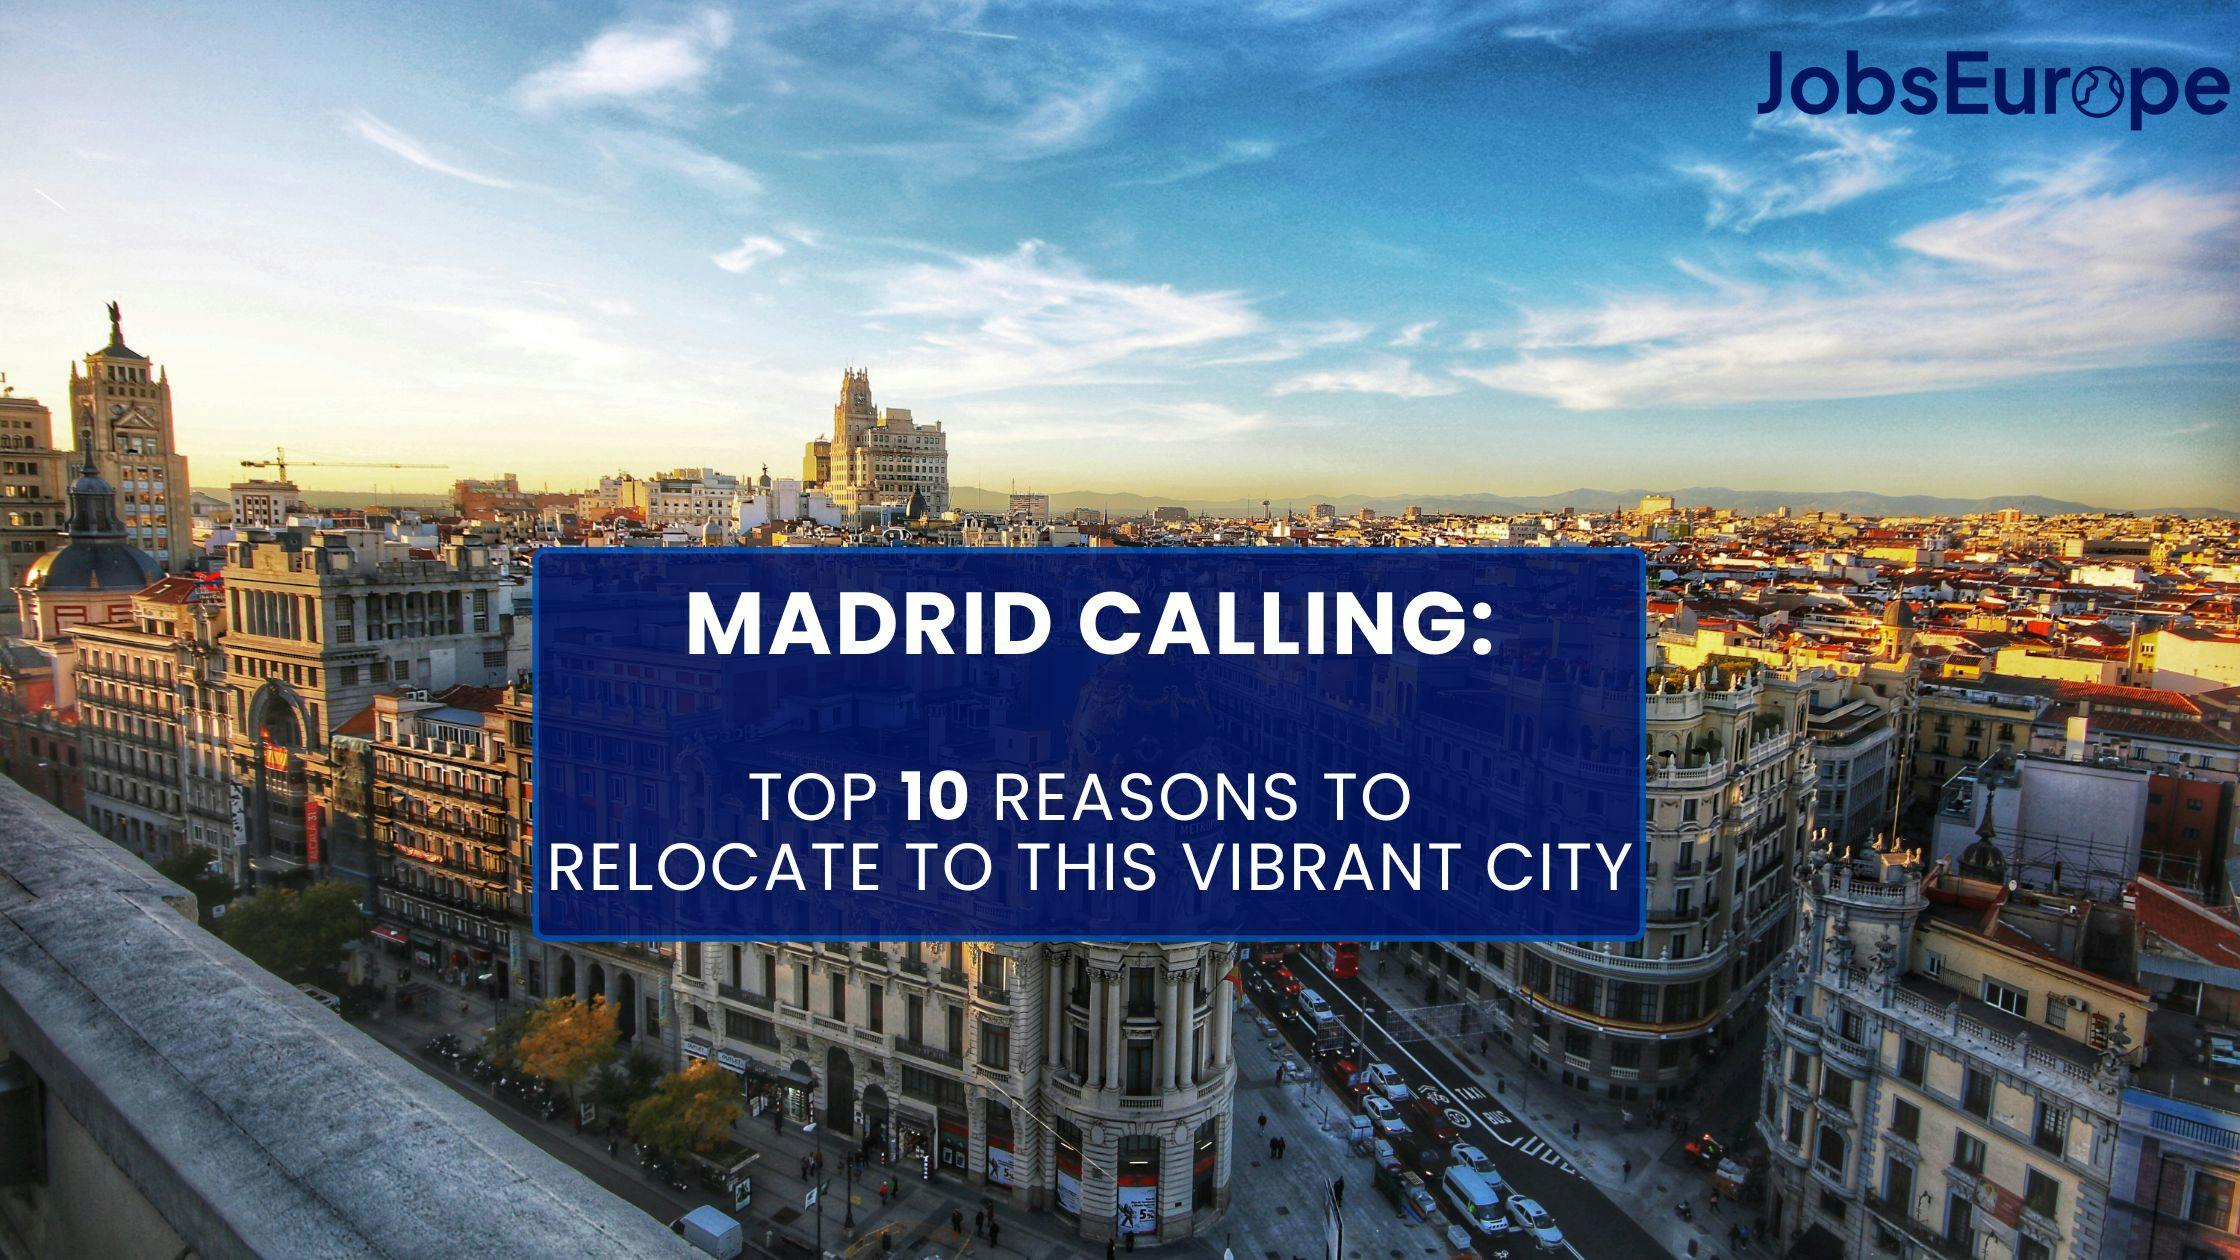 Madrid Calling: Top 10 Reasons to Relocate to This Vibrant City